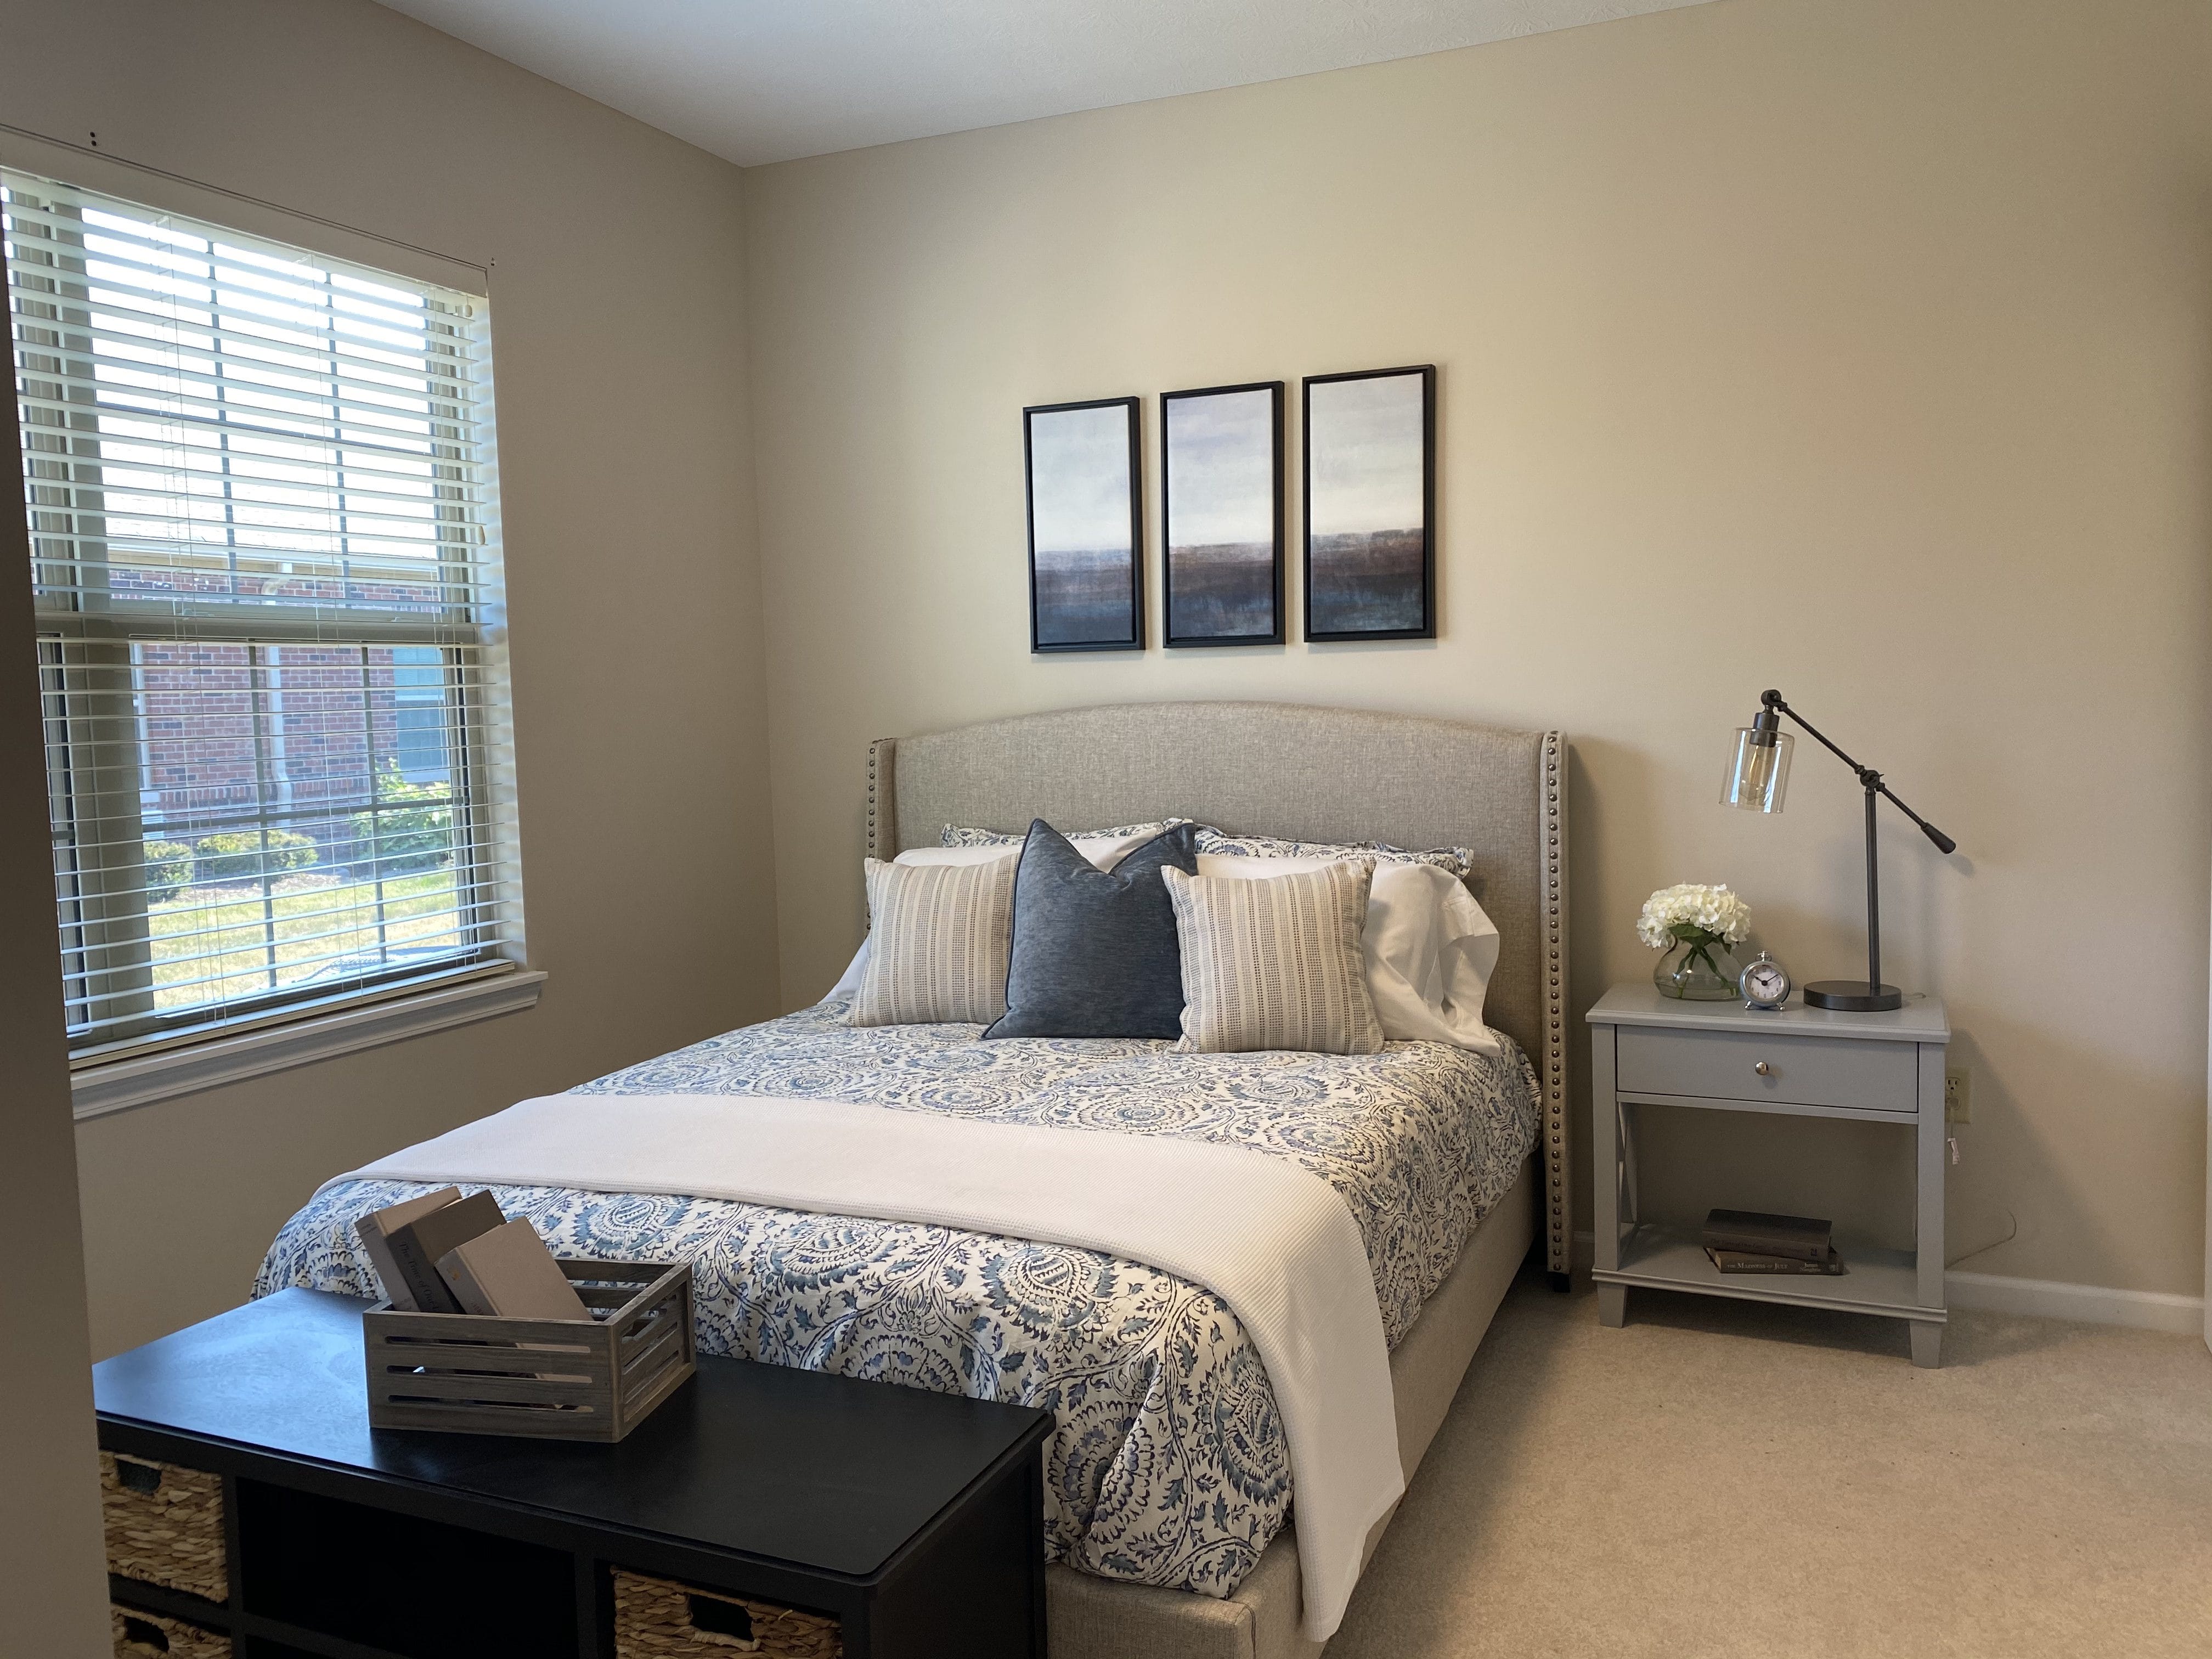 <span  class="uc_style_uc_tiles_grid_image_elementor_uc_items_attribute_title" style="color:#000000;">Bedroom interior of Aster Place Independent Living Apartments</span>